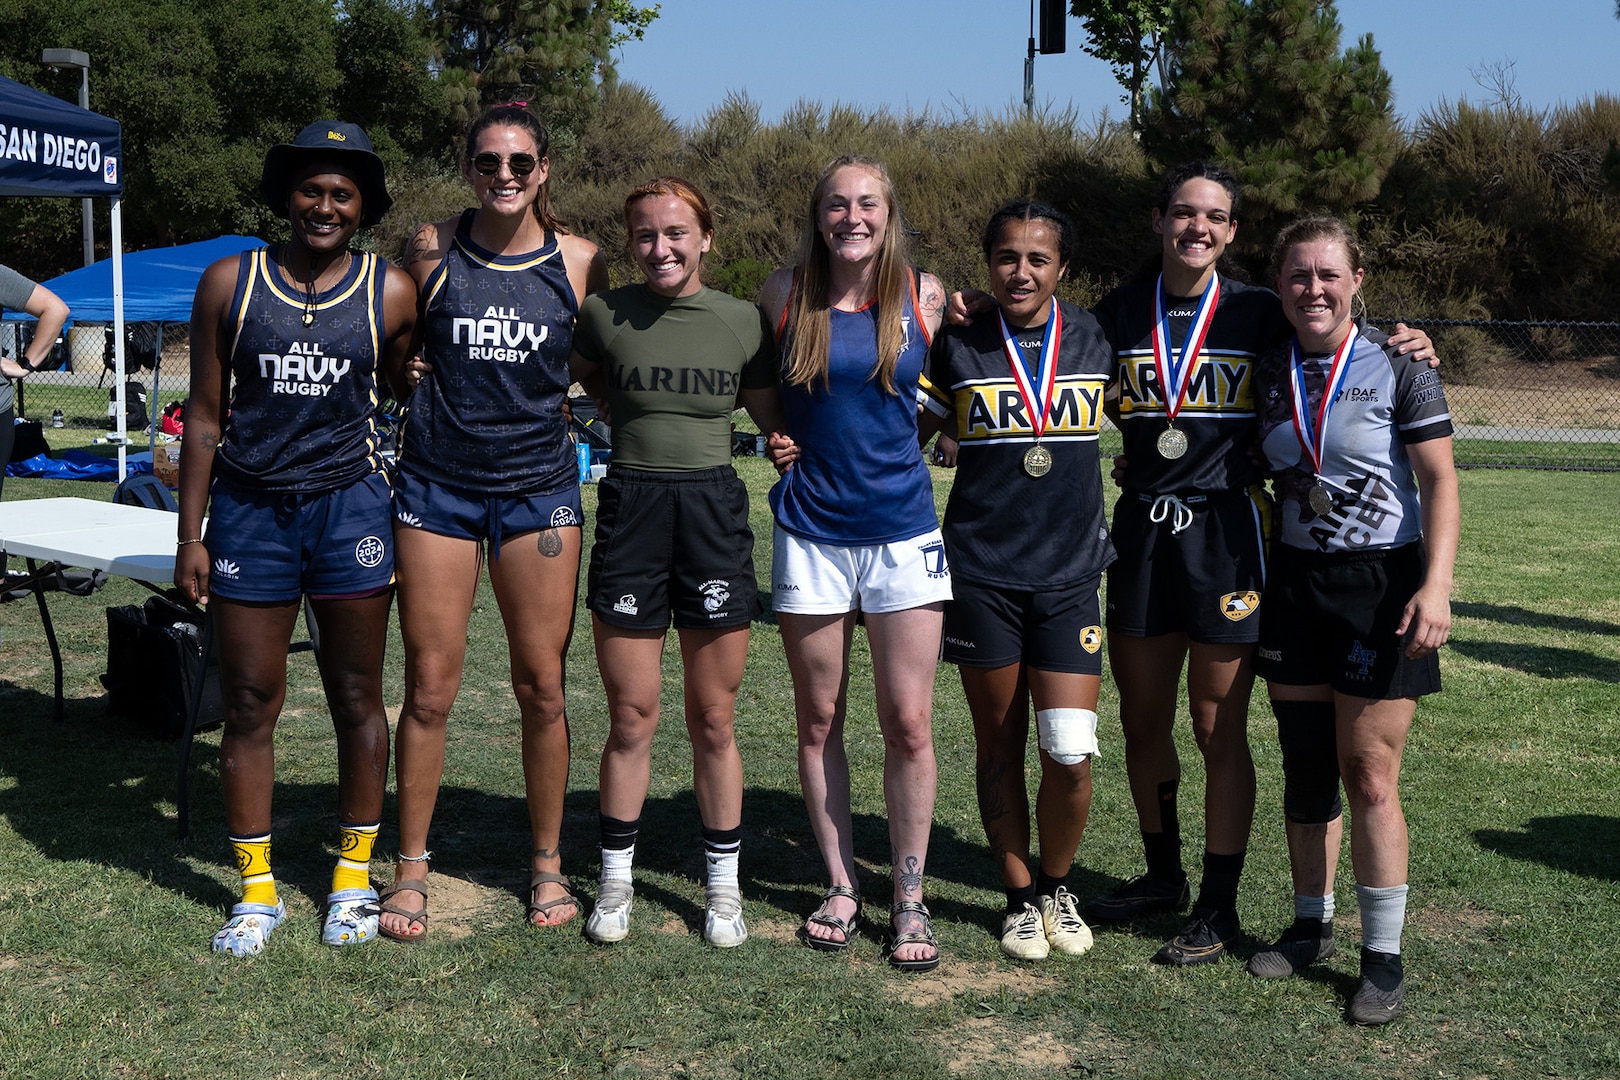 From left to right.  All-Tournament team selections:  Navy Petty Officer 3rd Class Alex Sutton, NAS Jacksonville, Florida, Navy Ensign Megan Neyen, NB Pearl Harbor, Hawaii, Marine Cpl. Anastasia Schraff, MCAS Miramar, Calif. Coast Guard Lt. Hollis Connick, Sector Delaware Bay, Pa.,  Army Sgt. Joanne Fa'avesi, Ft. Carson, Colo., Army 1st Lt. Cienna Jordan, Army Reserves, Air Force Capt. Adrienne Yoder, Ramstein AFB, Germany.The 2024 Armed Forces Women’s Rugby Championships held in conjunction with the San Diego Surfers Women’s Rugby Club 7’s Tournament in San Diego, Calif. from July 12-13. Service members from the Army, Marine Corps, Navy, Air Force (with Space Force players), and Coast Guard battle it out for gold.